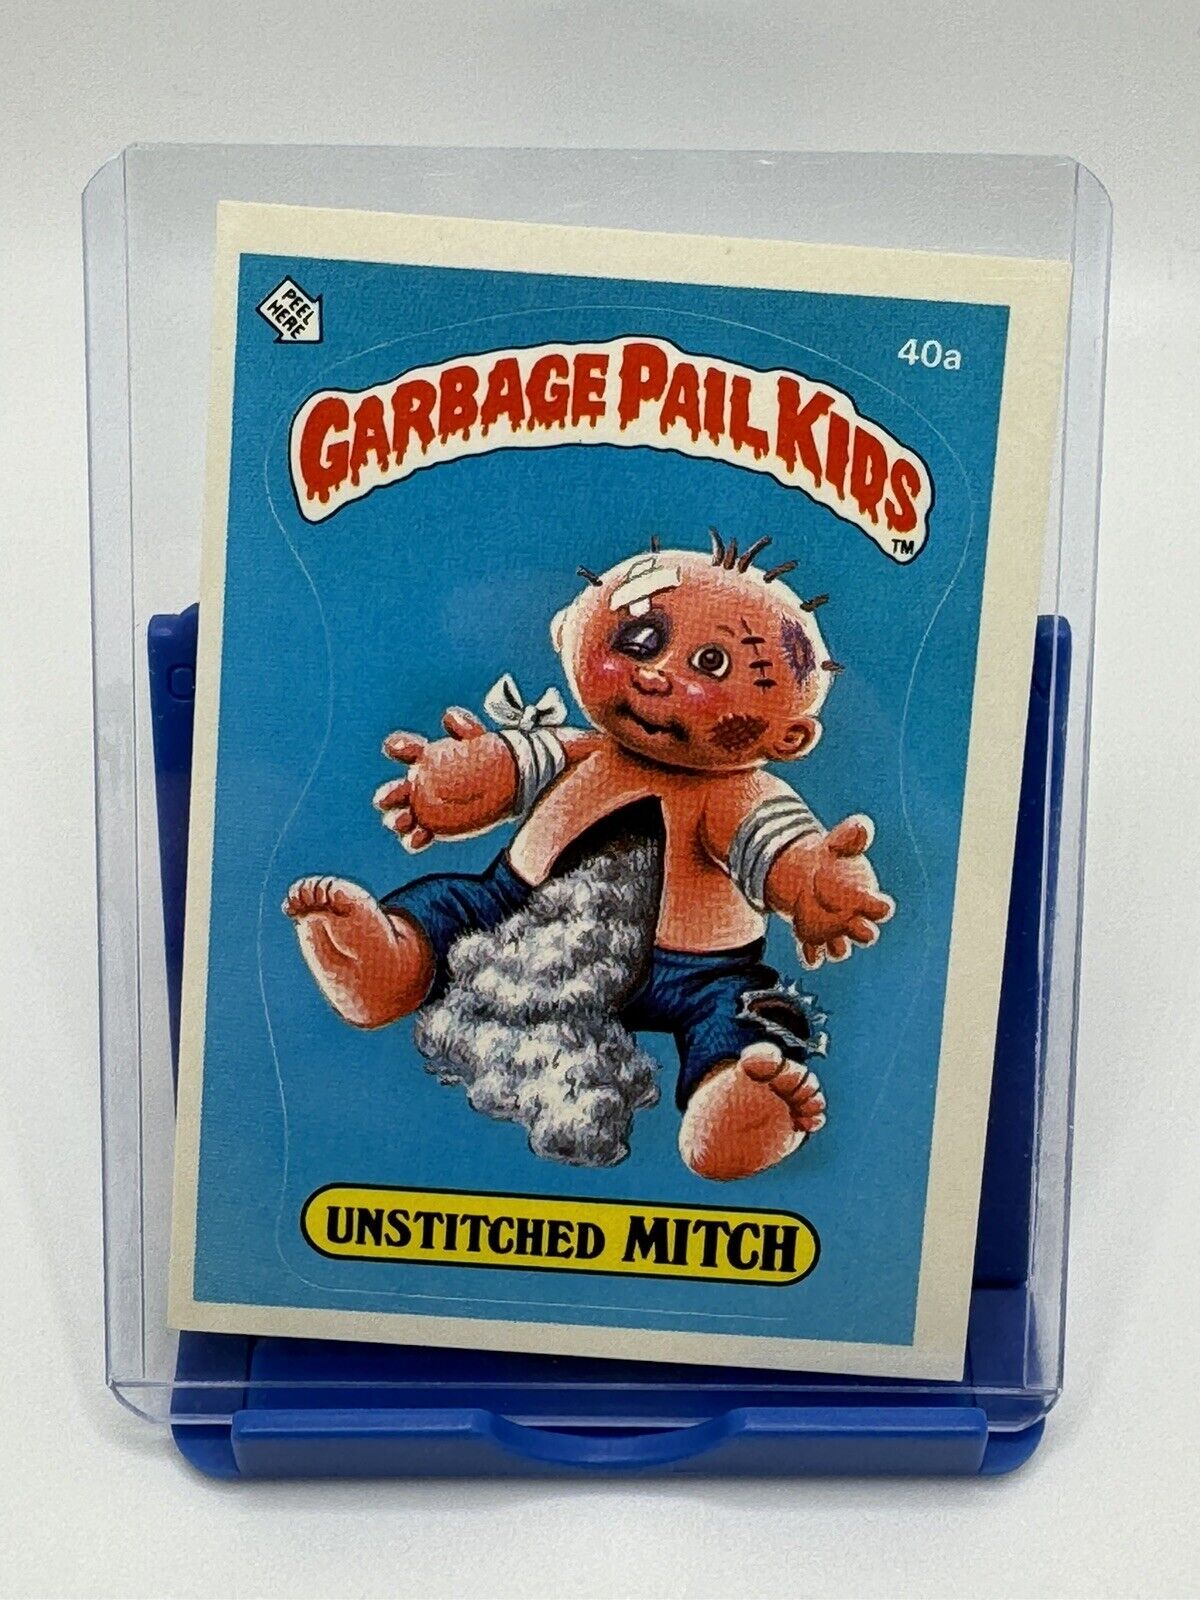 1985 Topps Garbage Pail Kids Card # 40a - (Orig Series 1) - UNSTITCHED MITCH